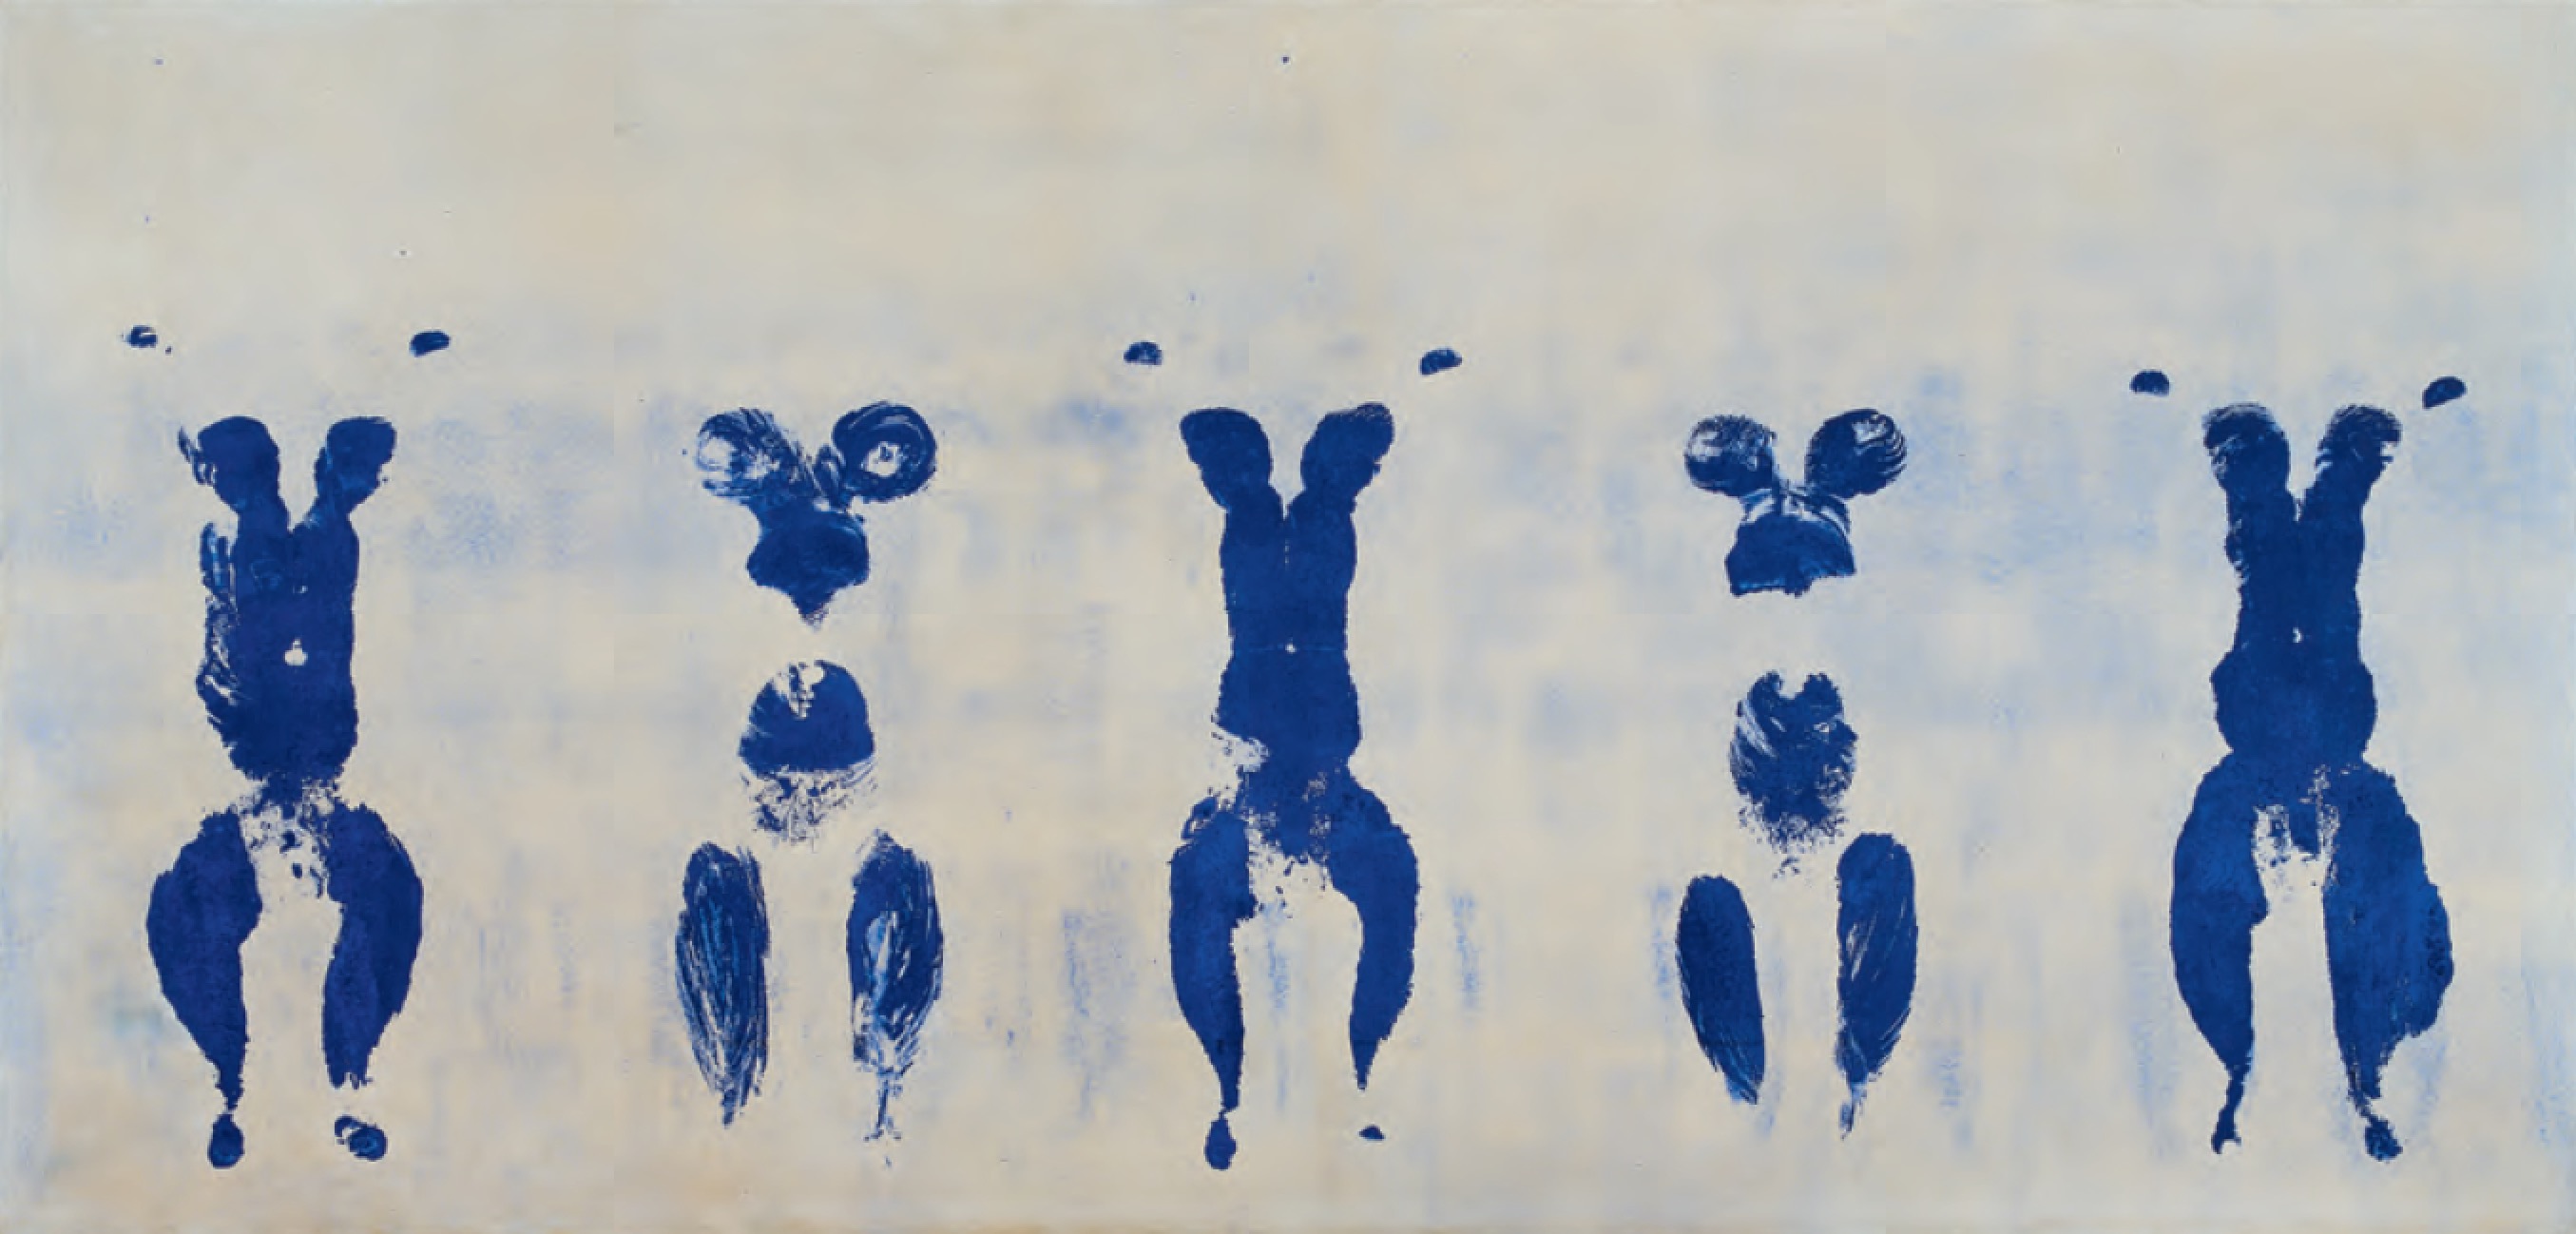 Yves Klein (1928–62) Untitled Anthropometry (ant 100) 1960, dry pigment and synthetic resin on paper mounted on canvas 144.8 x 299.5 cm (57 x 118 in), Hirshhorn Museum and Sculpture Garden, Smithsoniam Institution, Washington, DC